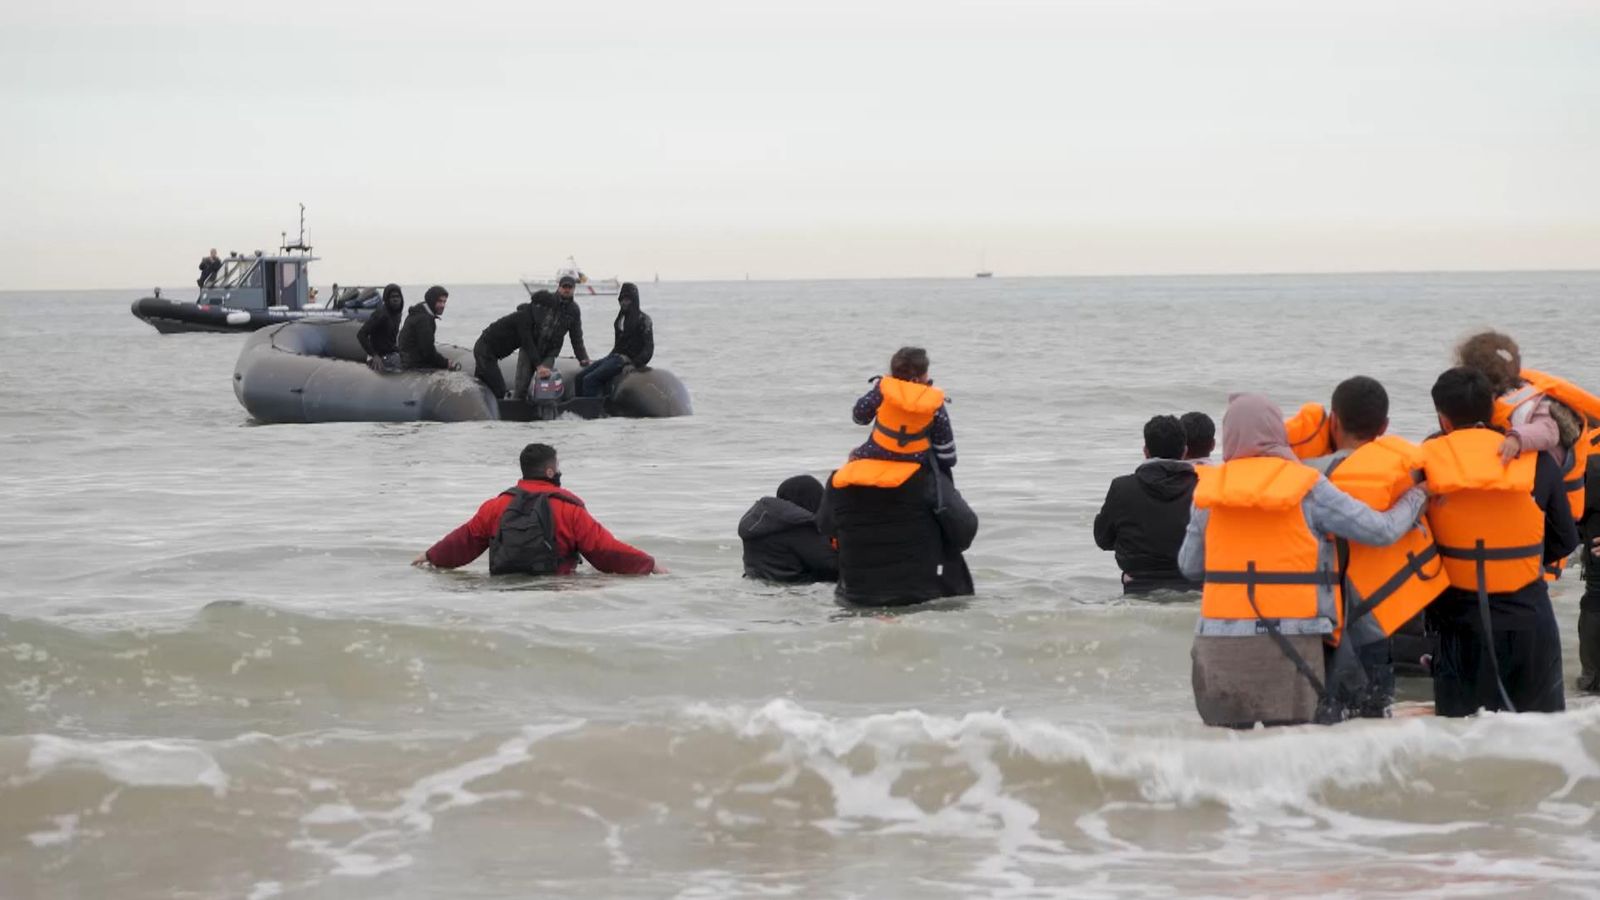 Migrants try to board small boat off French beach in desperate bid for Britain - as powerless police watch on